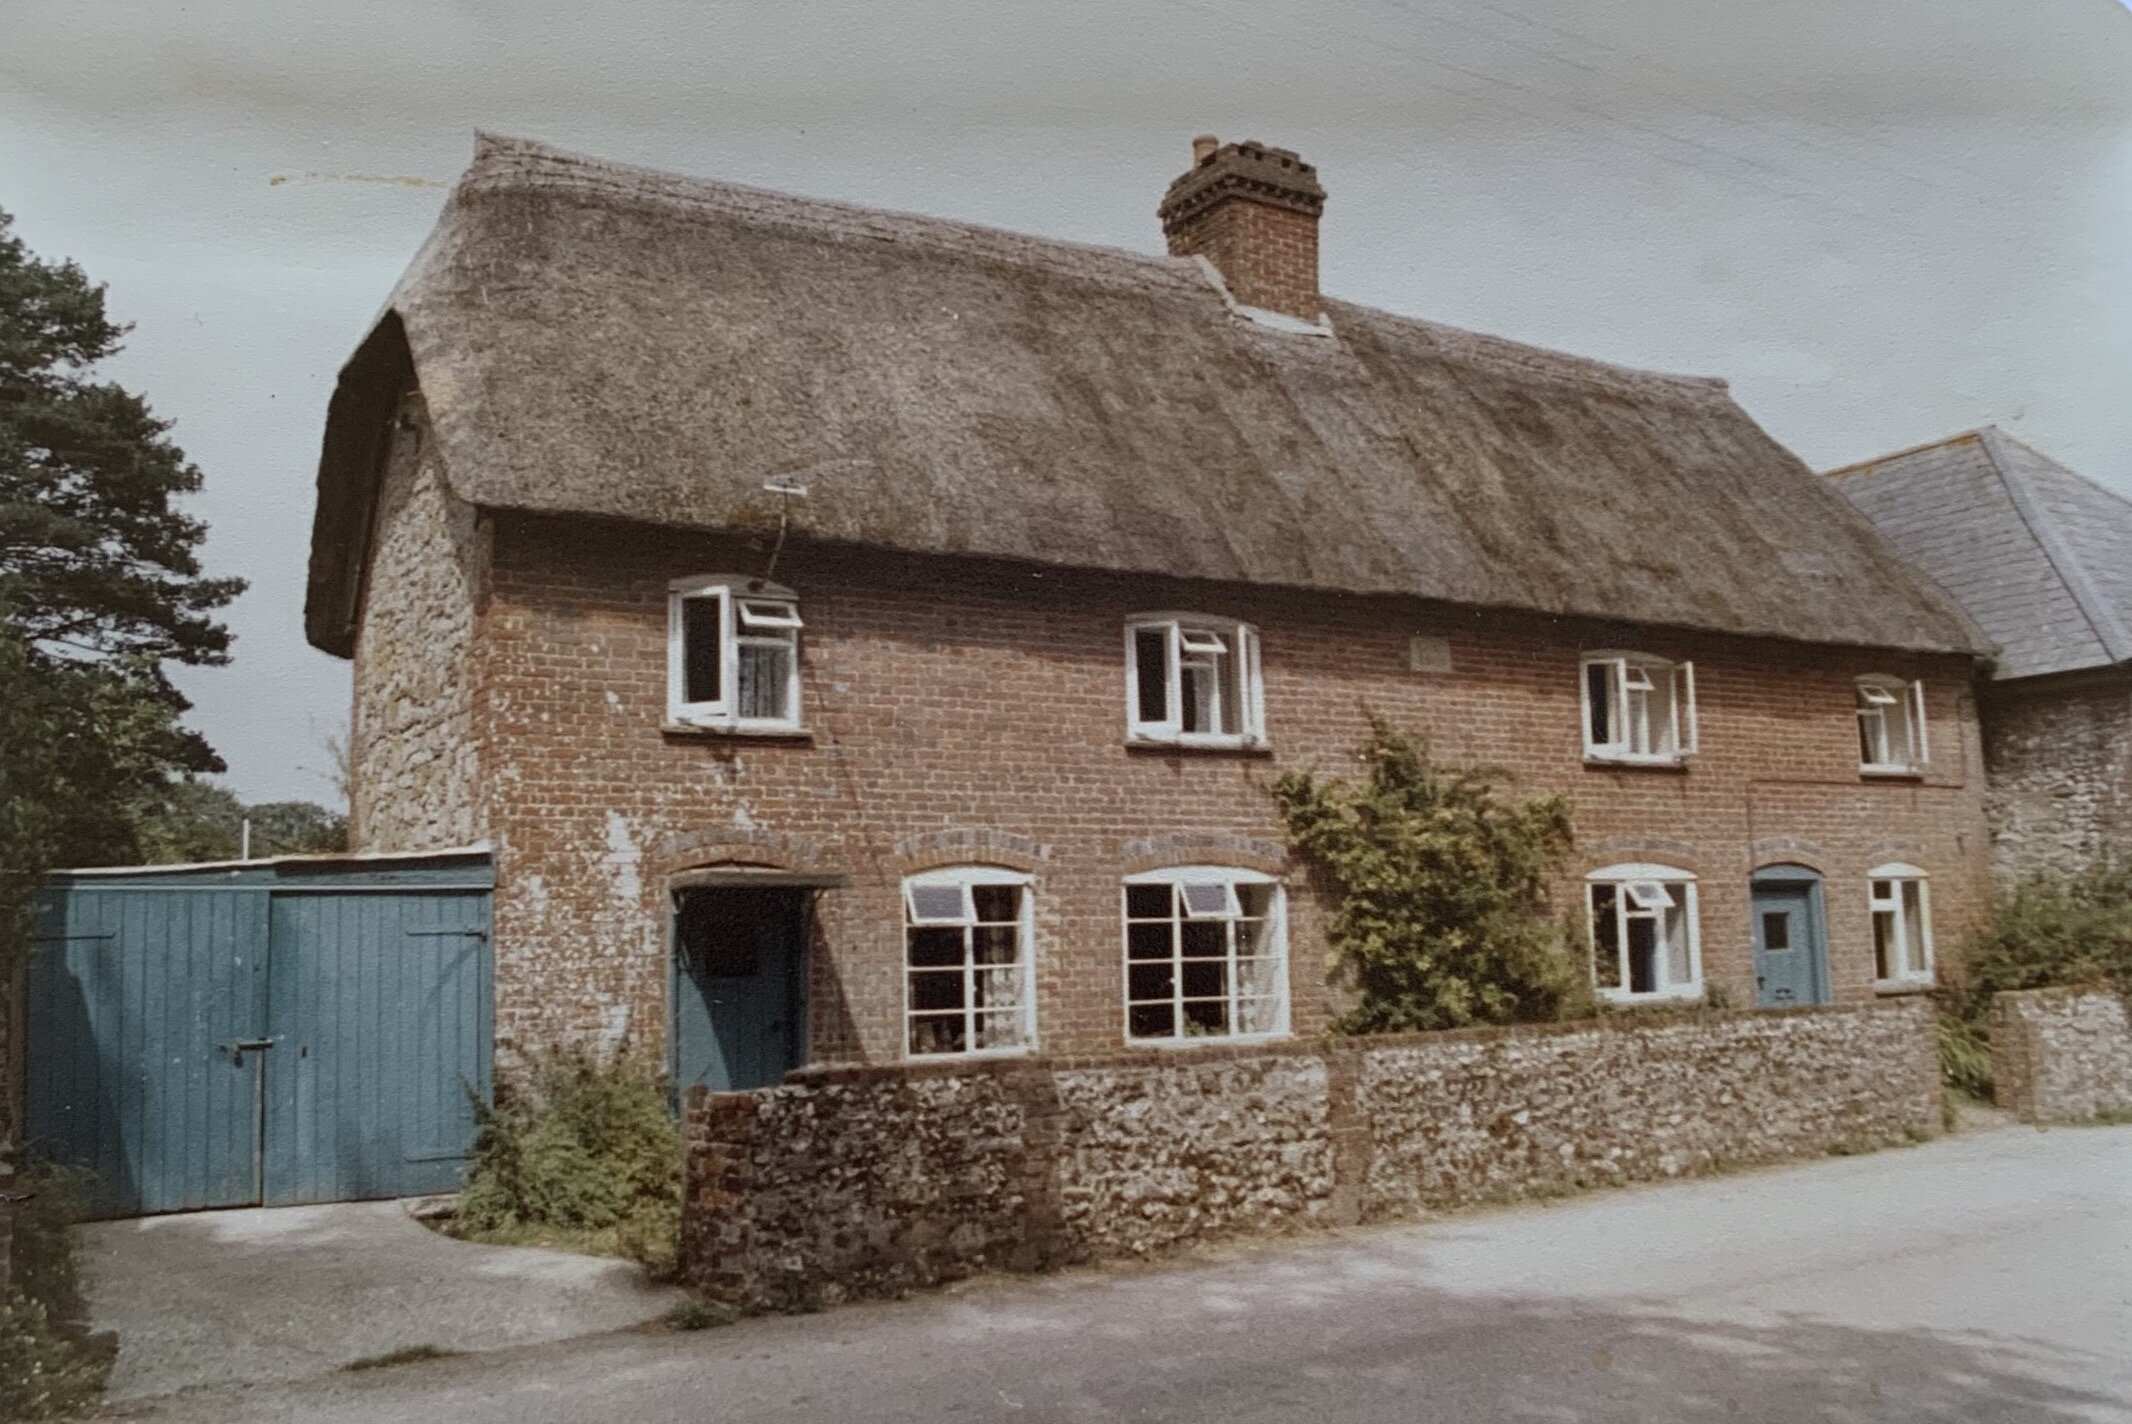 The cottage in 1980